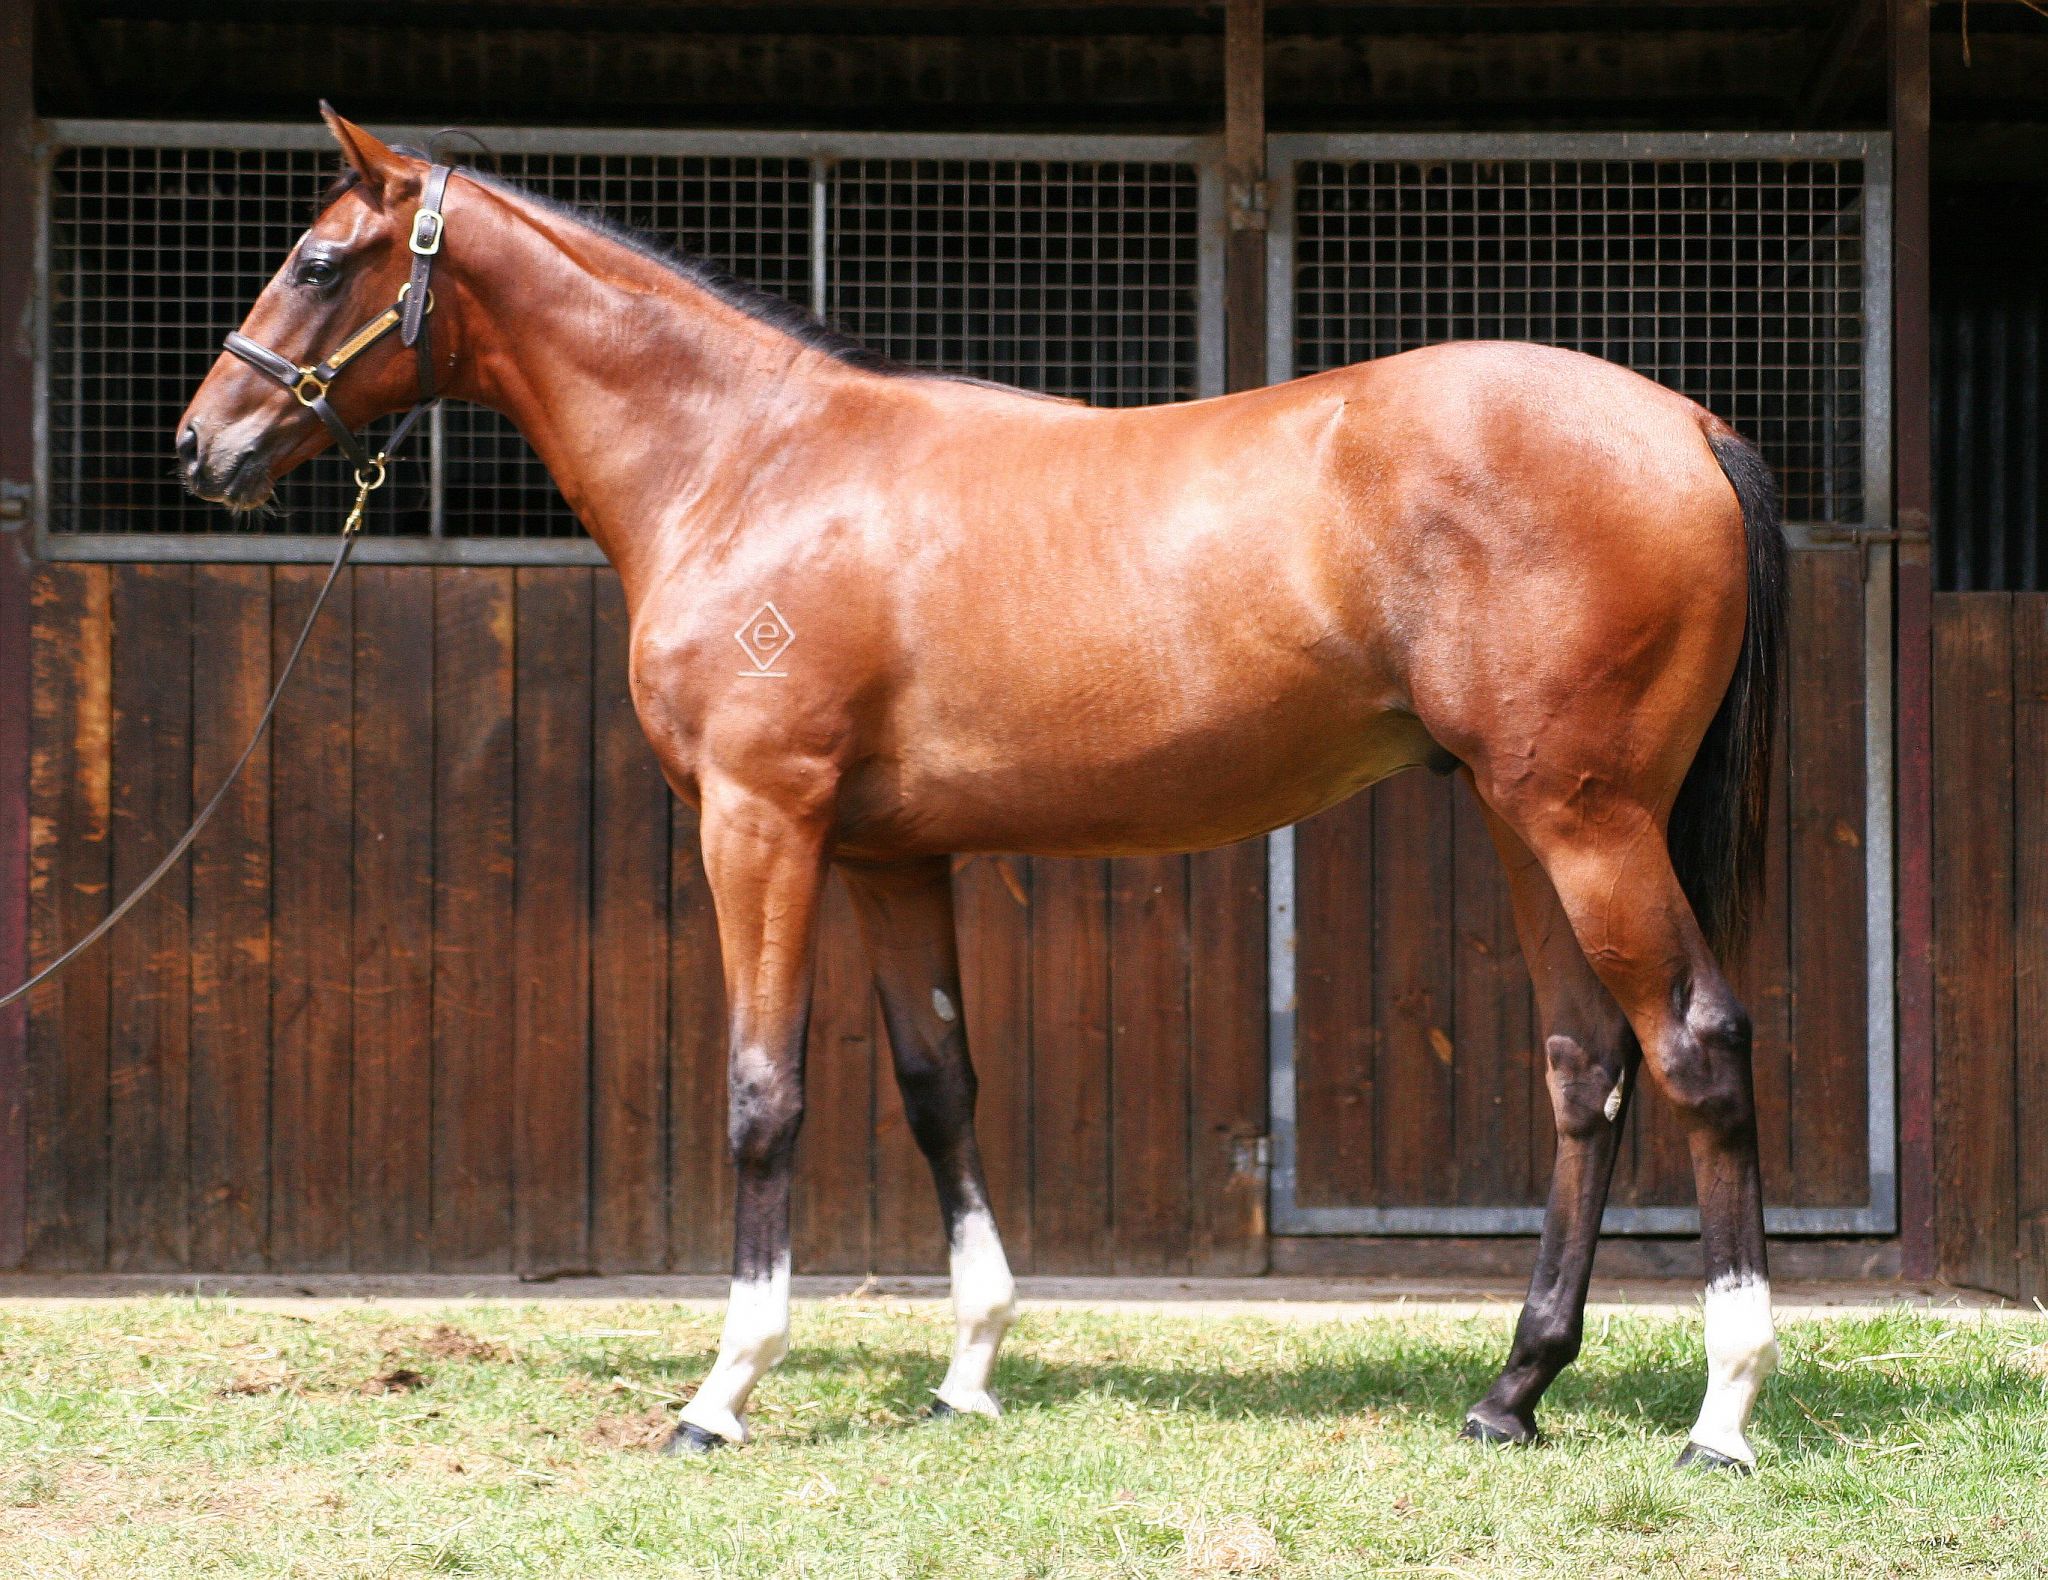 King Tat at 2018 Classic Yearling Sale